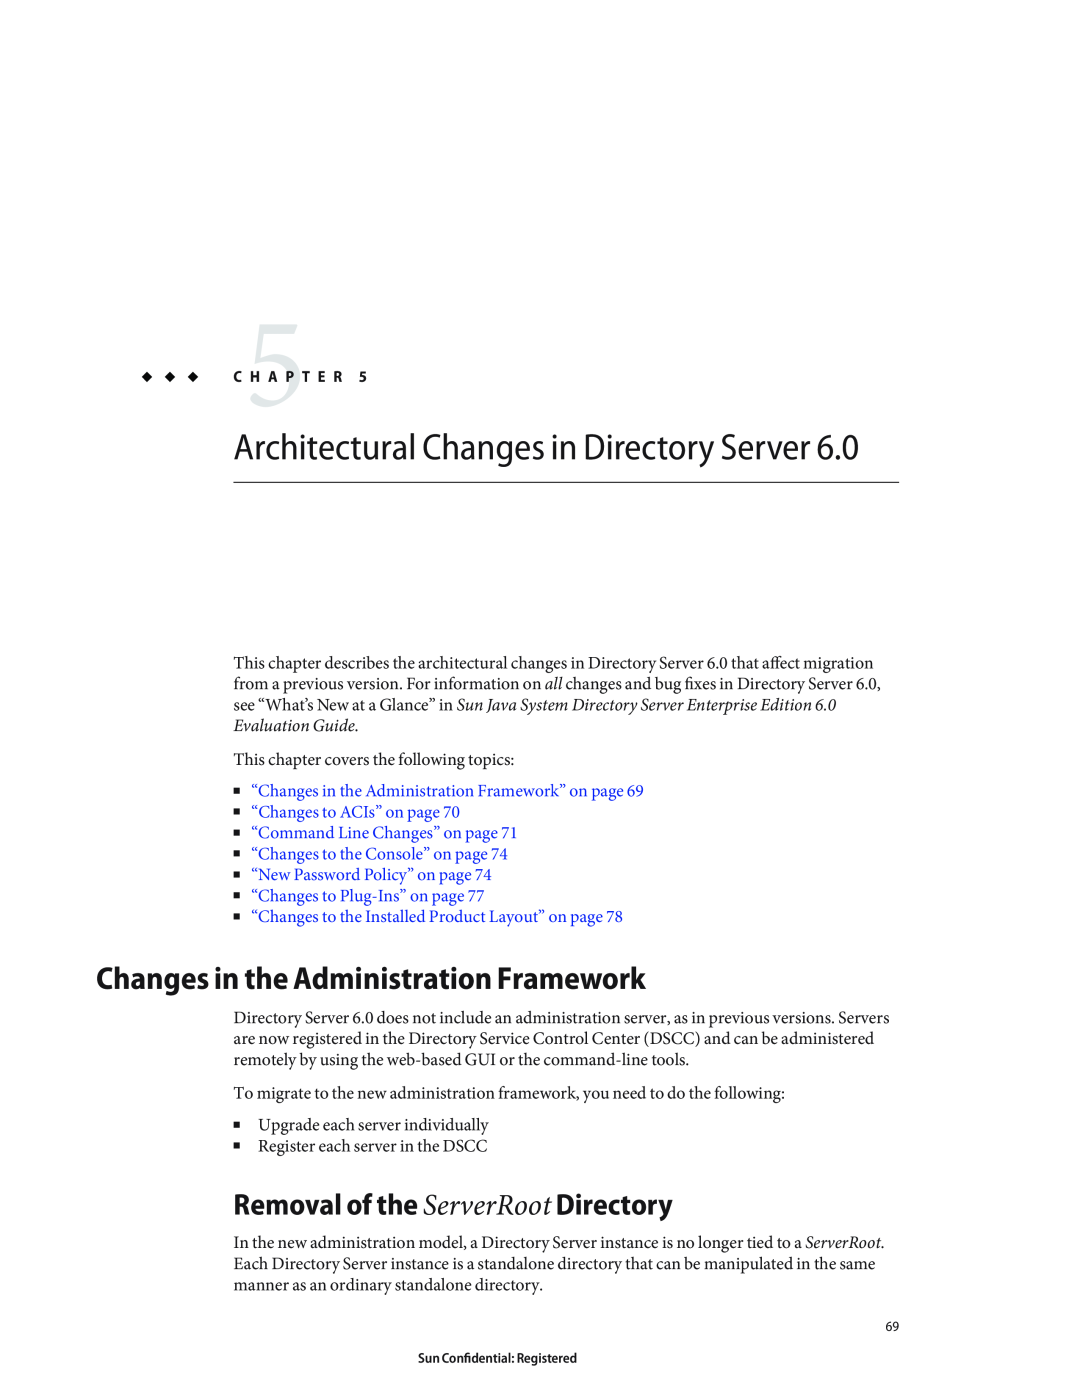 Sun Microsystems 8190994 manual Changes in the Administration Framework, Removal of the ServerRoot Directory 